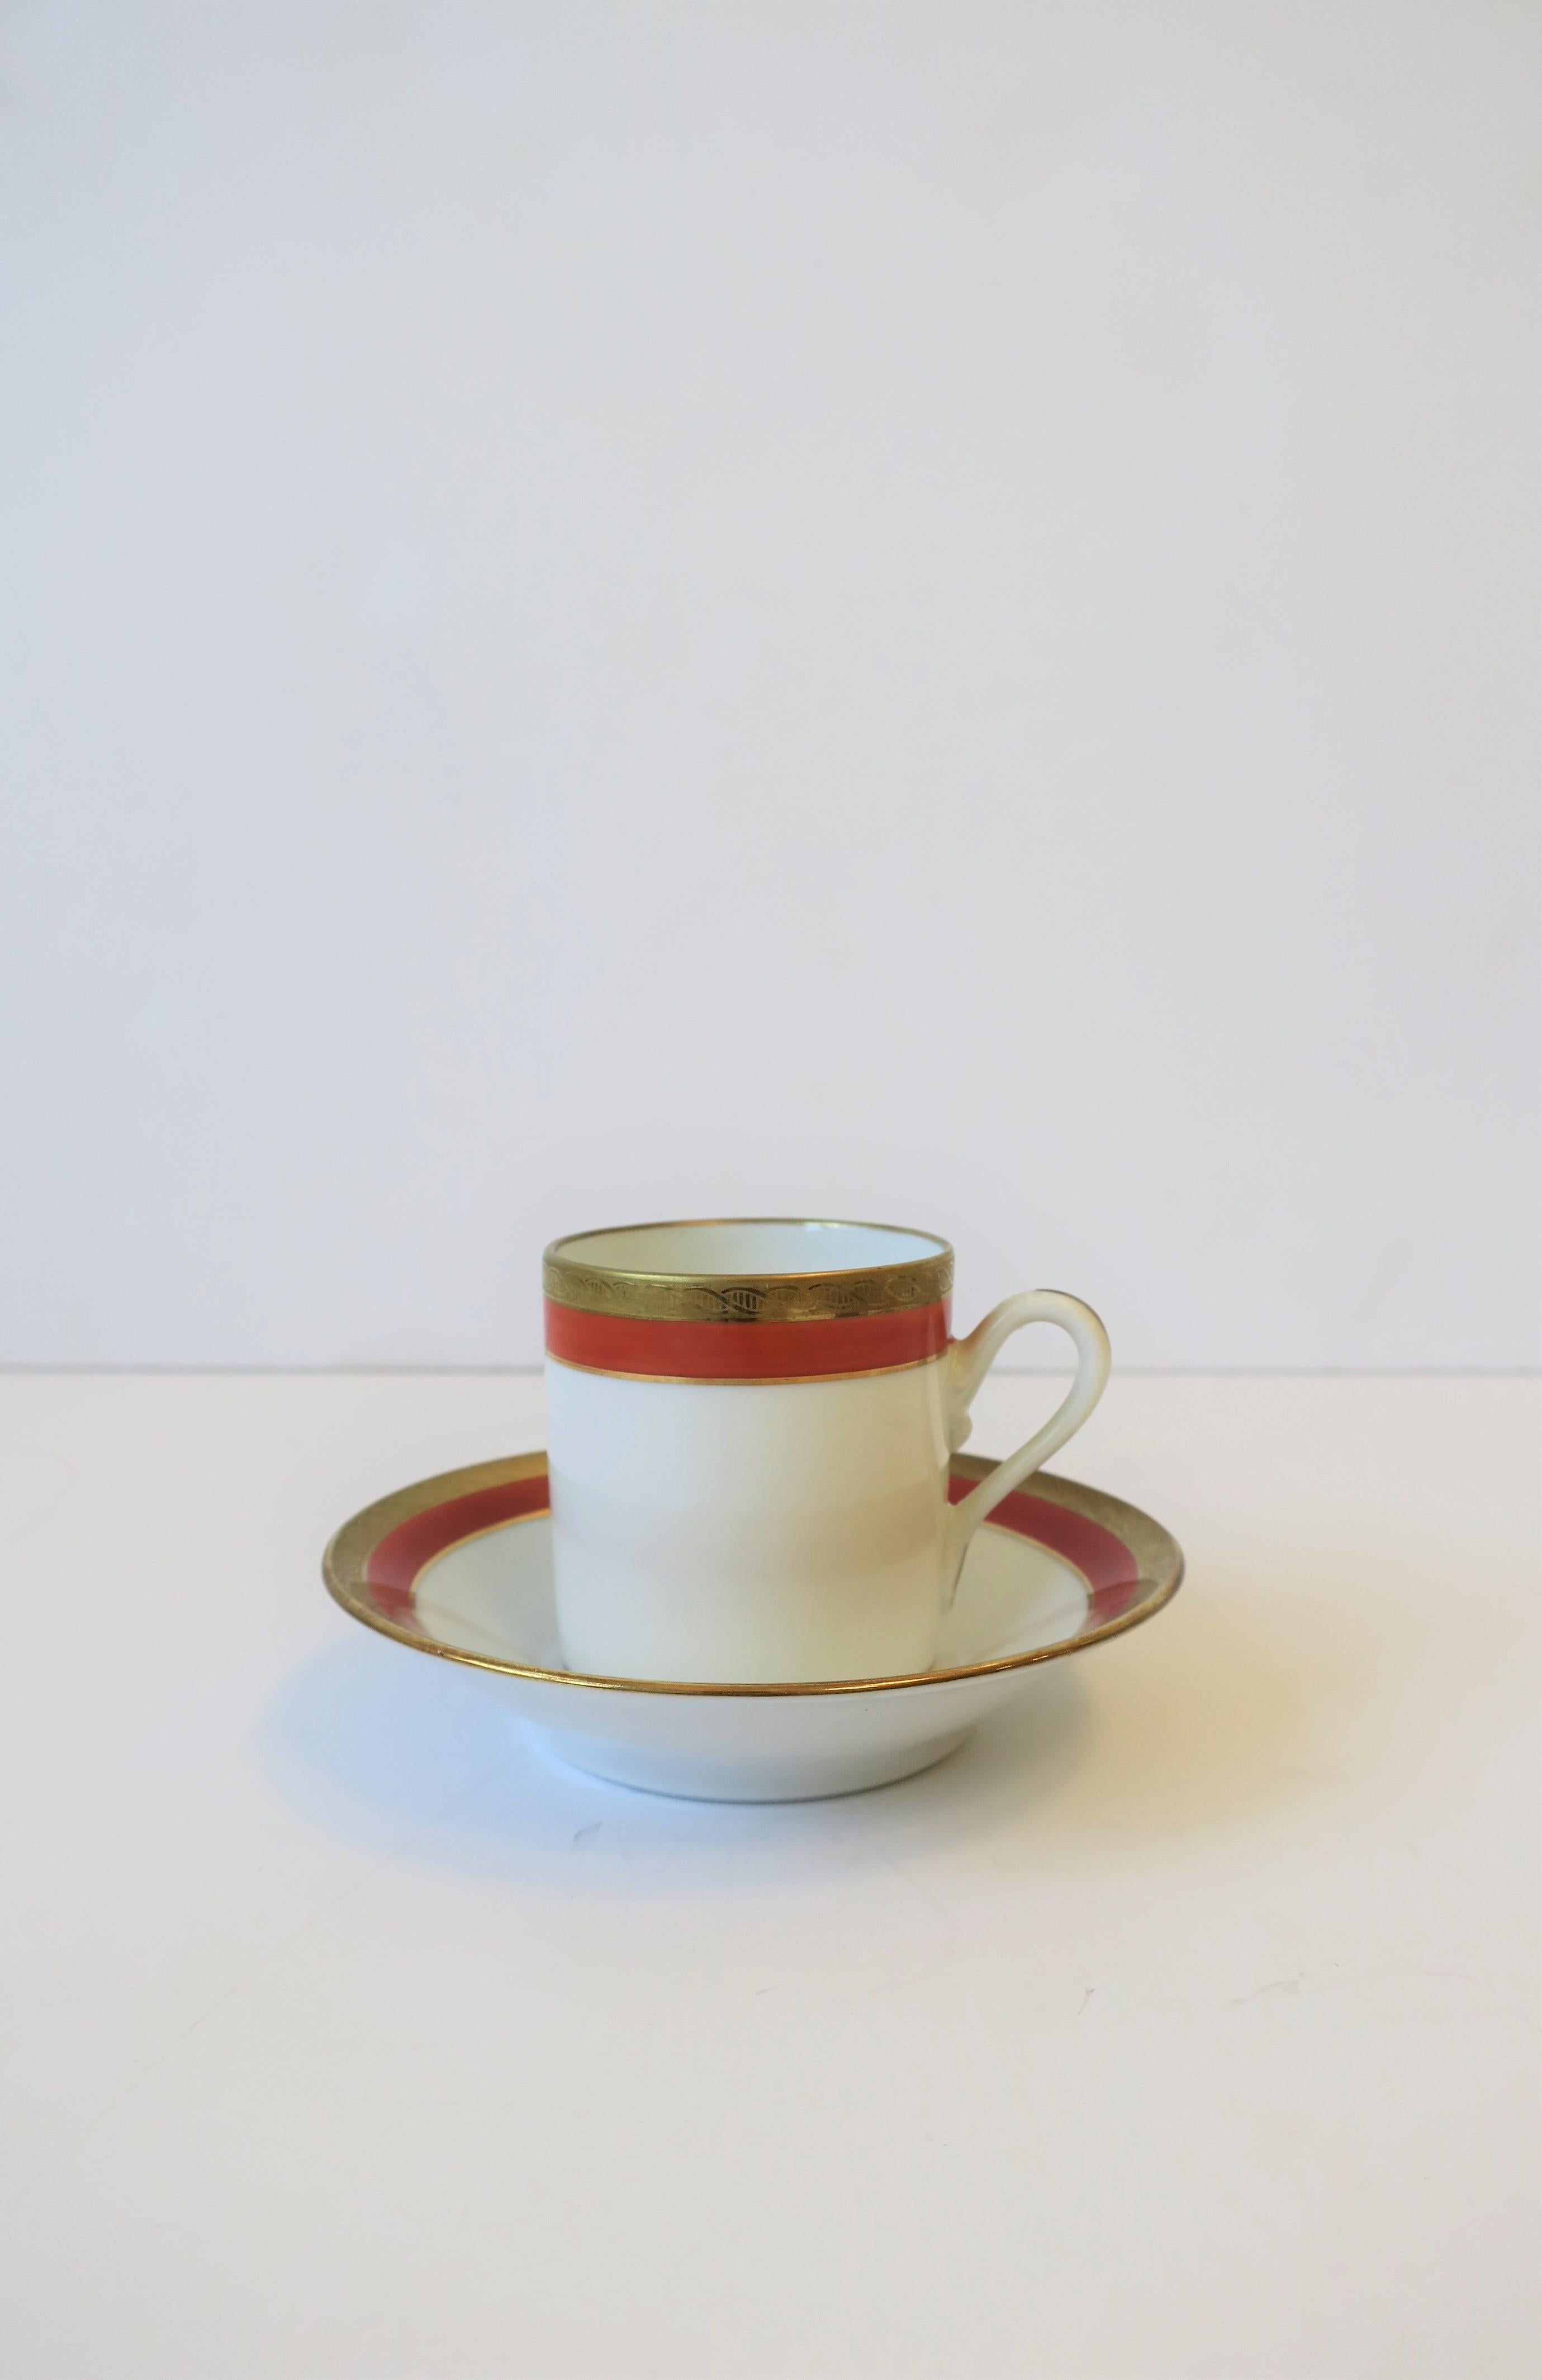 A beautiful Italian white and orange porcelain and gold gilt decoration espresso coffee or tea demitasse cup and saucer by designer Richard Ginori, circa mid-20th century, Italy. Colors include: White, orange and gold gilt. With maker's mark on